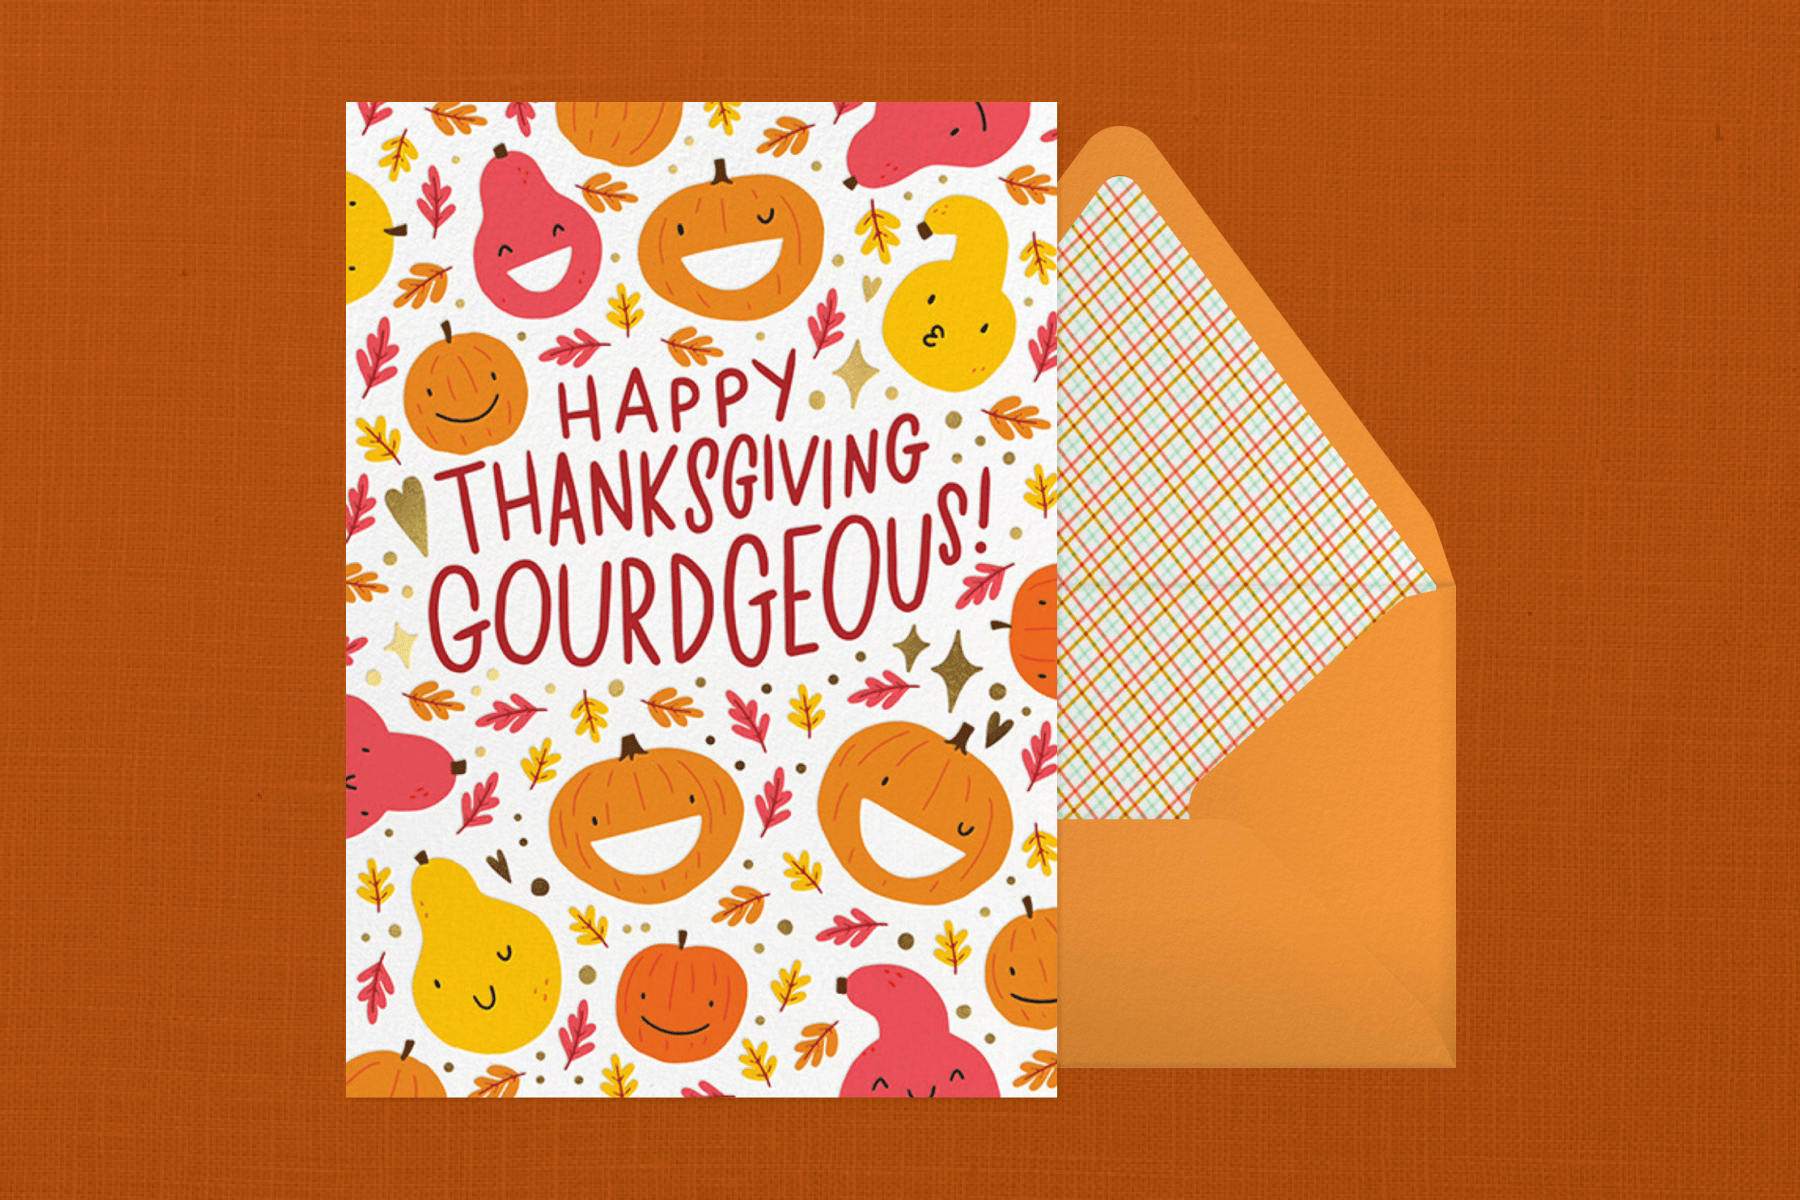 A Thanksgiving greeting card with illustrations of pumpkins and the words “Happy Thanksgiving Gourdgeous!”